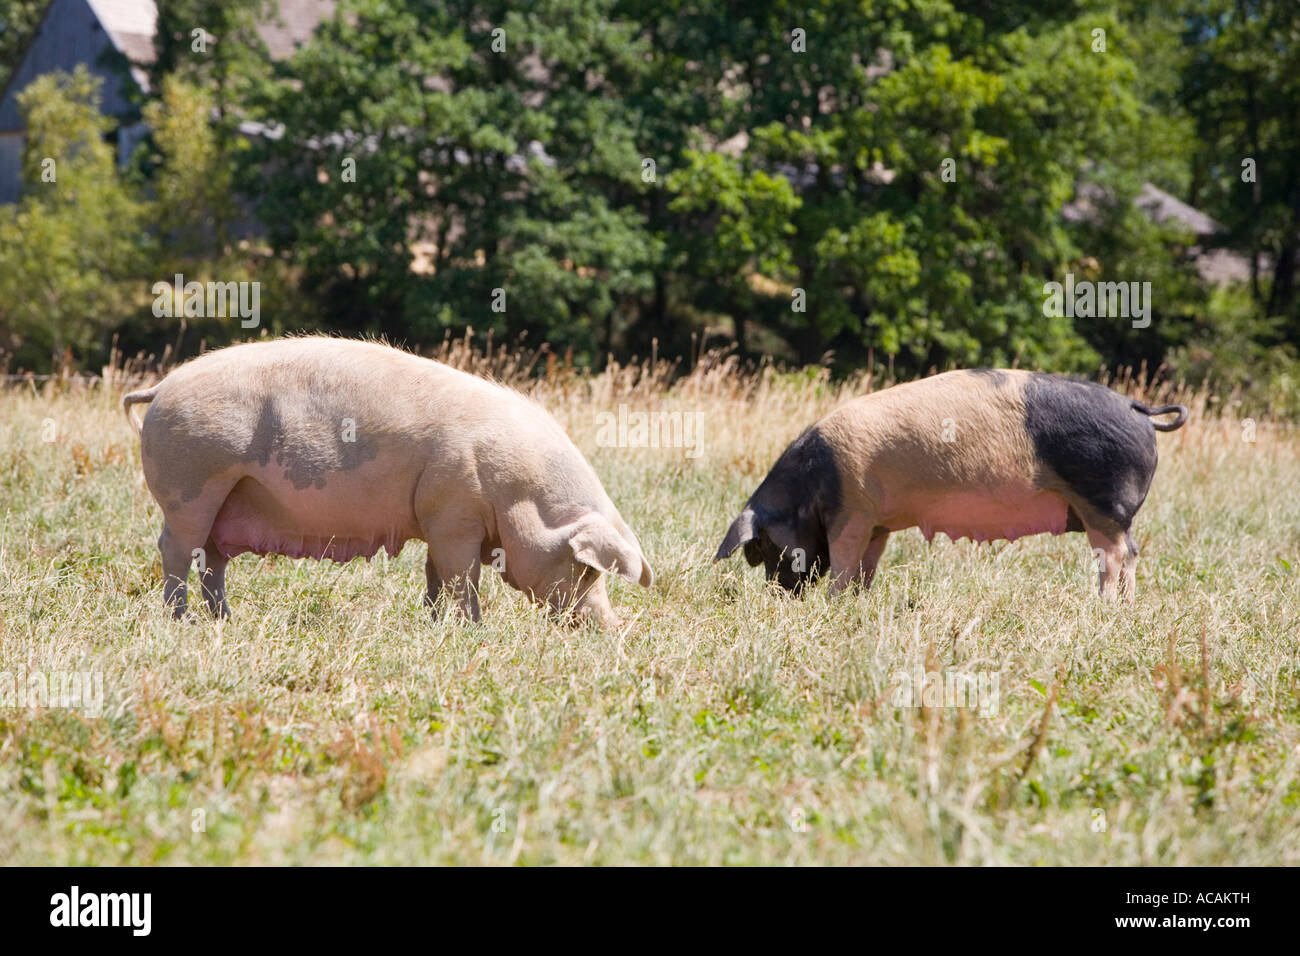 Pigs on a pasture Stock Photo